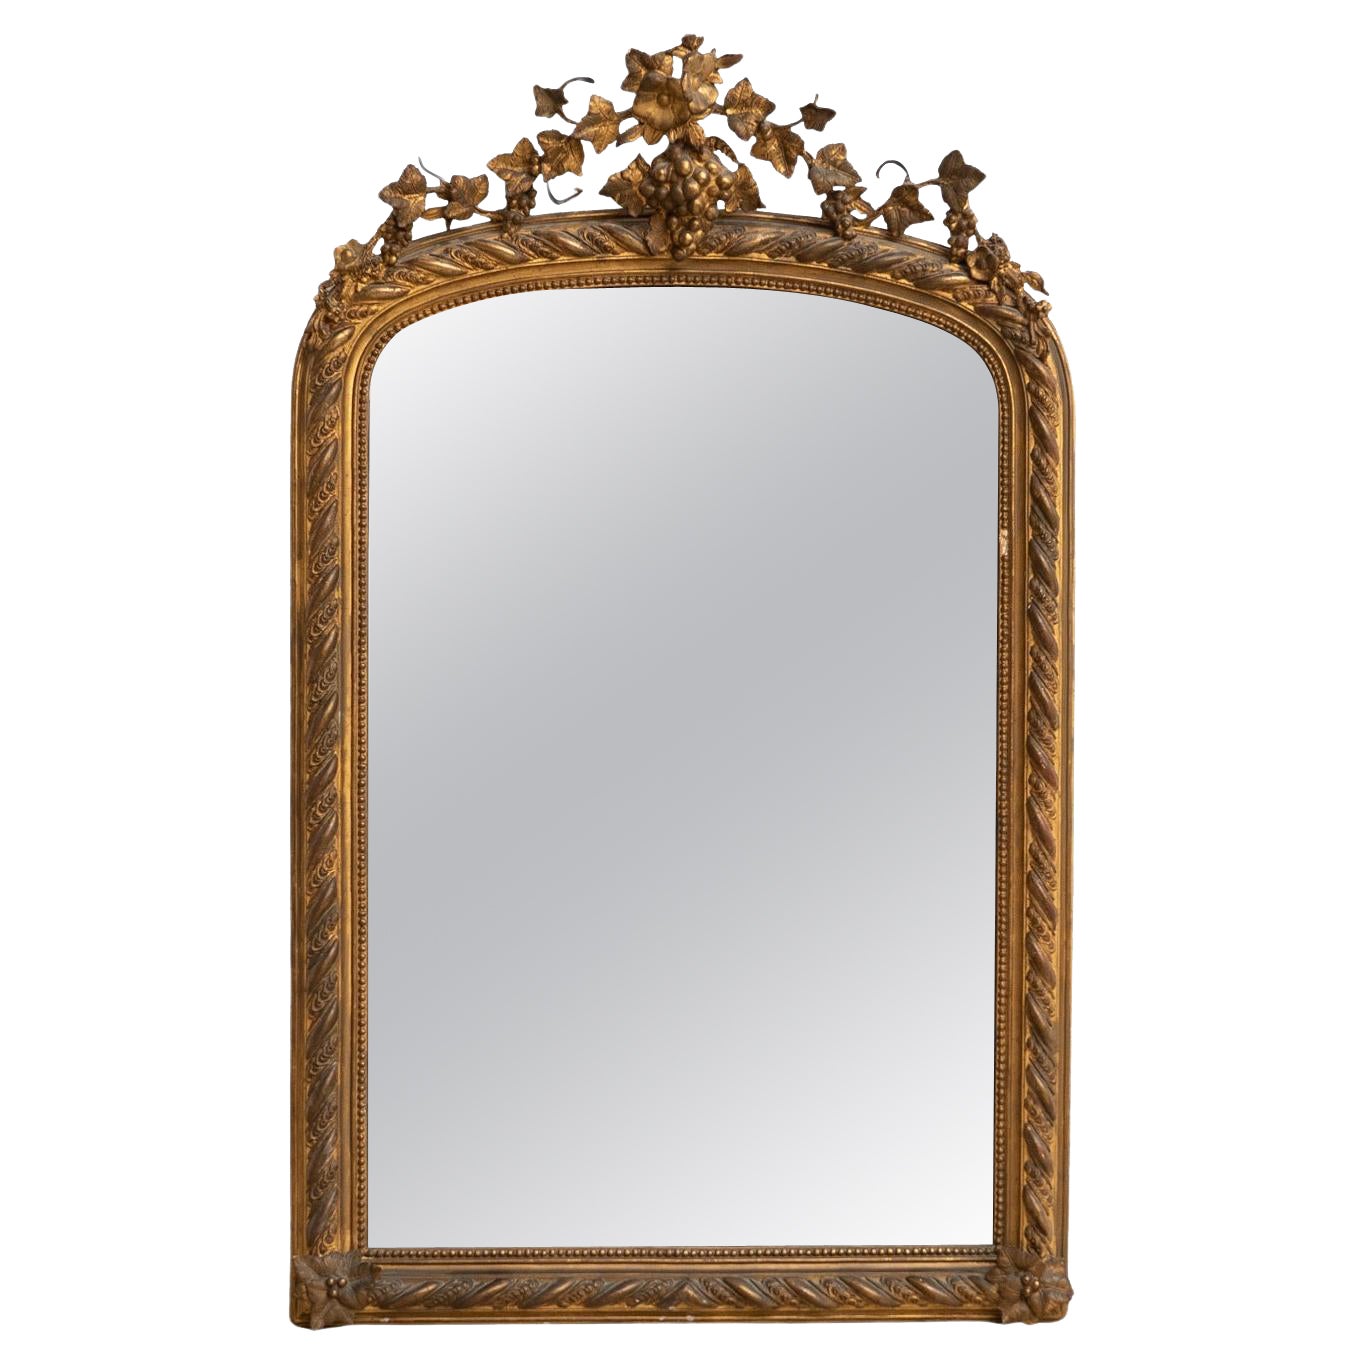 Antique Napoleon III Style Gilded Wood and Stucco Mirror, Early 20th Century For Sale